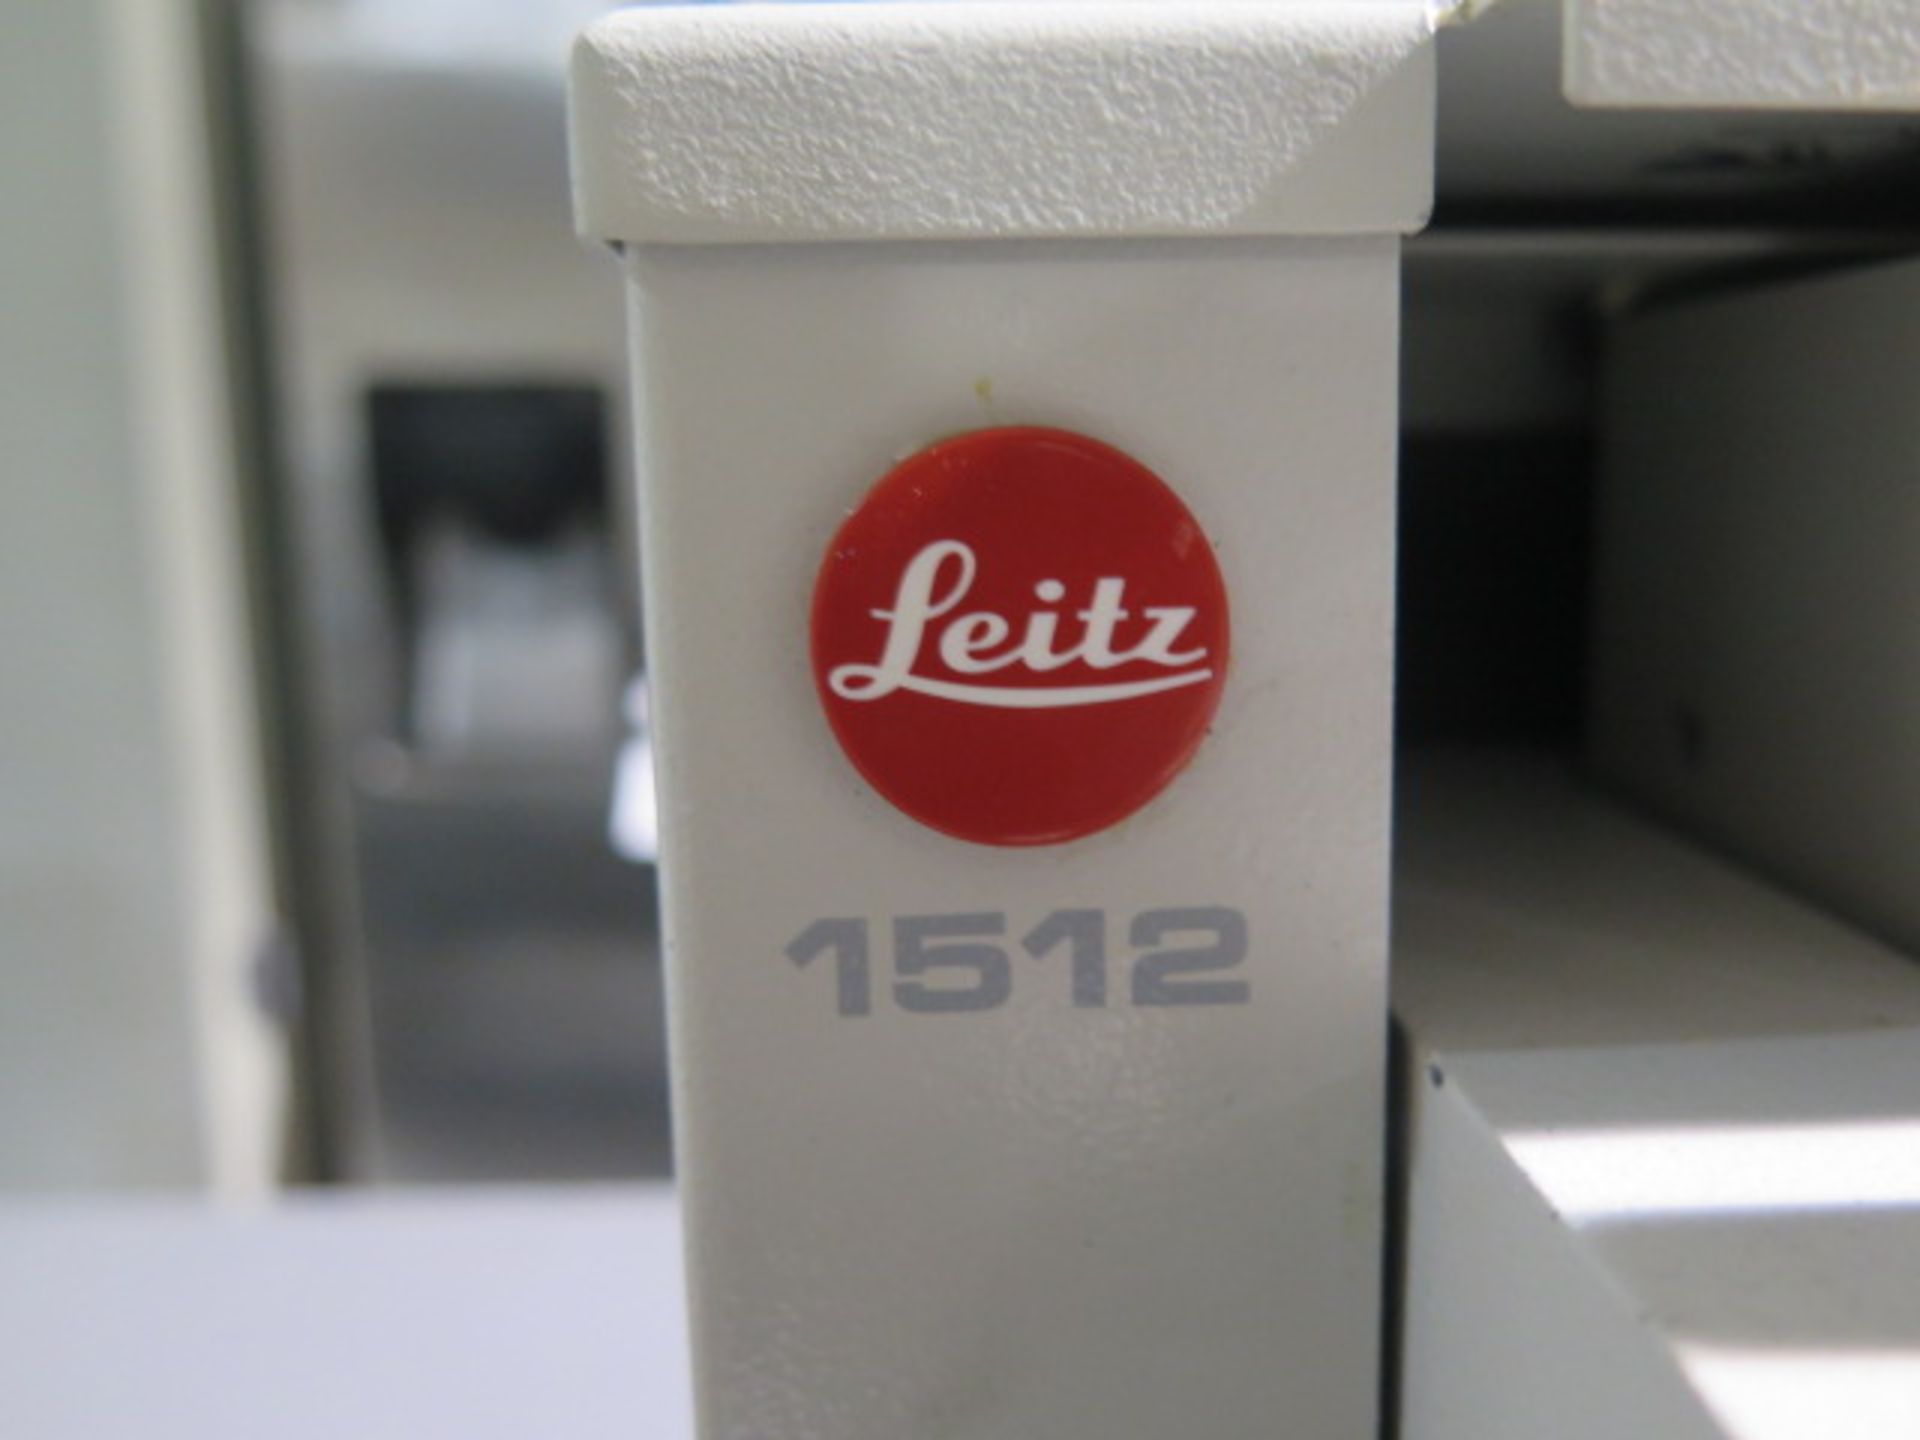 Leitz mdl. 1512 Rotary Microtome (SOLD AS-IS - NO WARRANTY) - Image 8 of 8